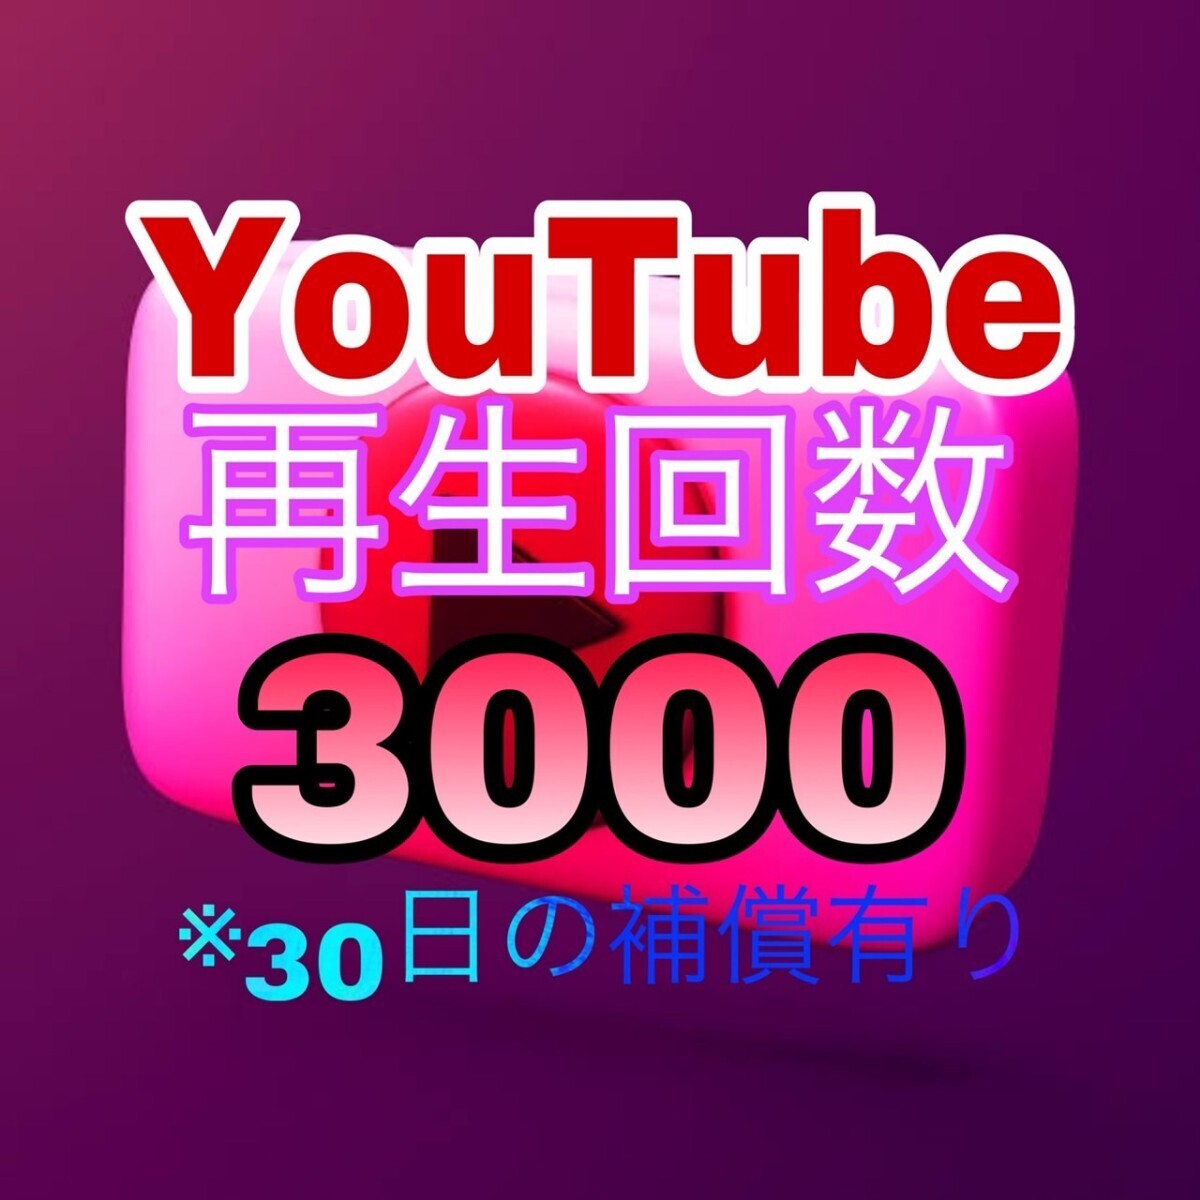 [ extra 3000 YouTube reproduction number of times increase ] You tube Twitter Tiktok automatic tool Insta fo lower ... reproduction number channel registration person 